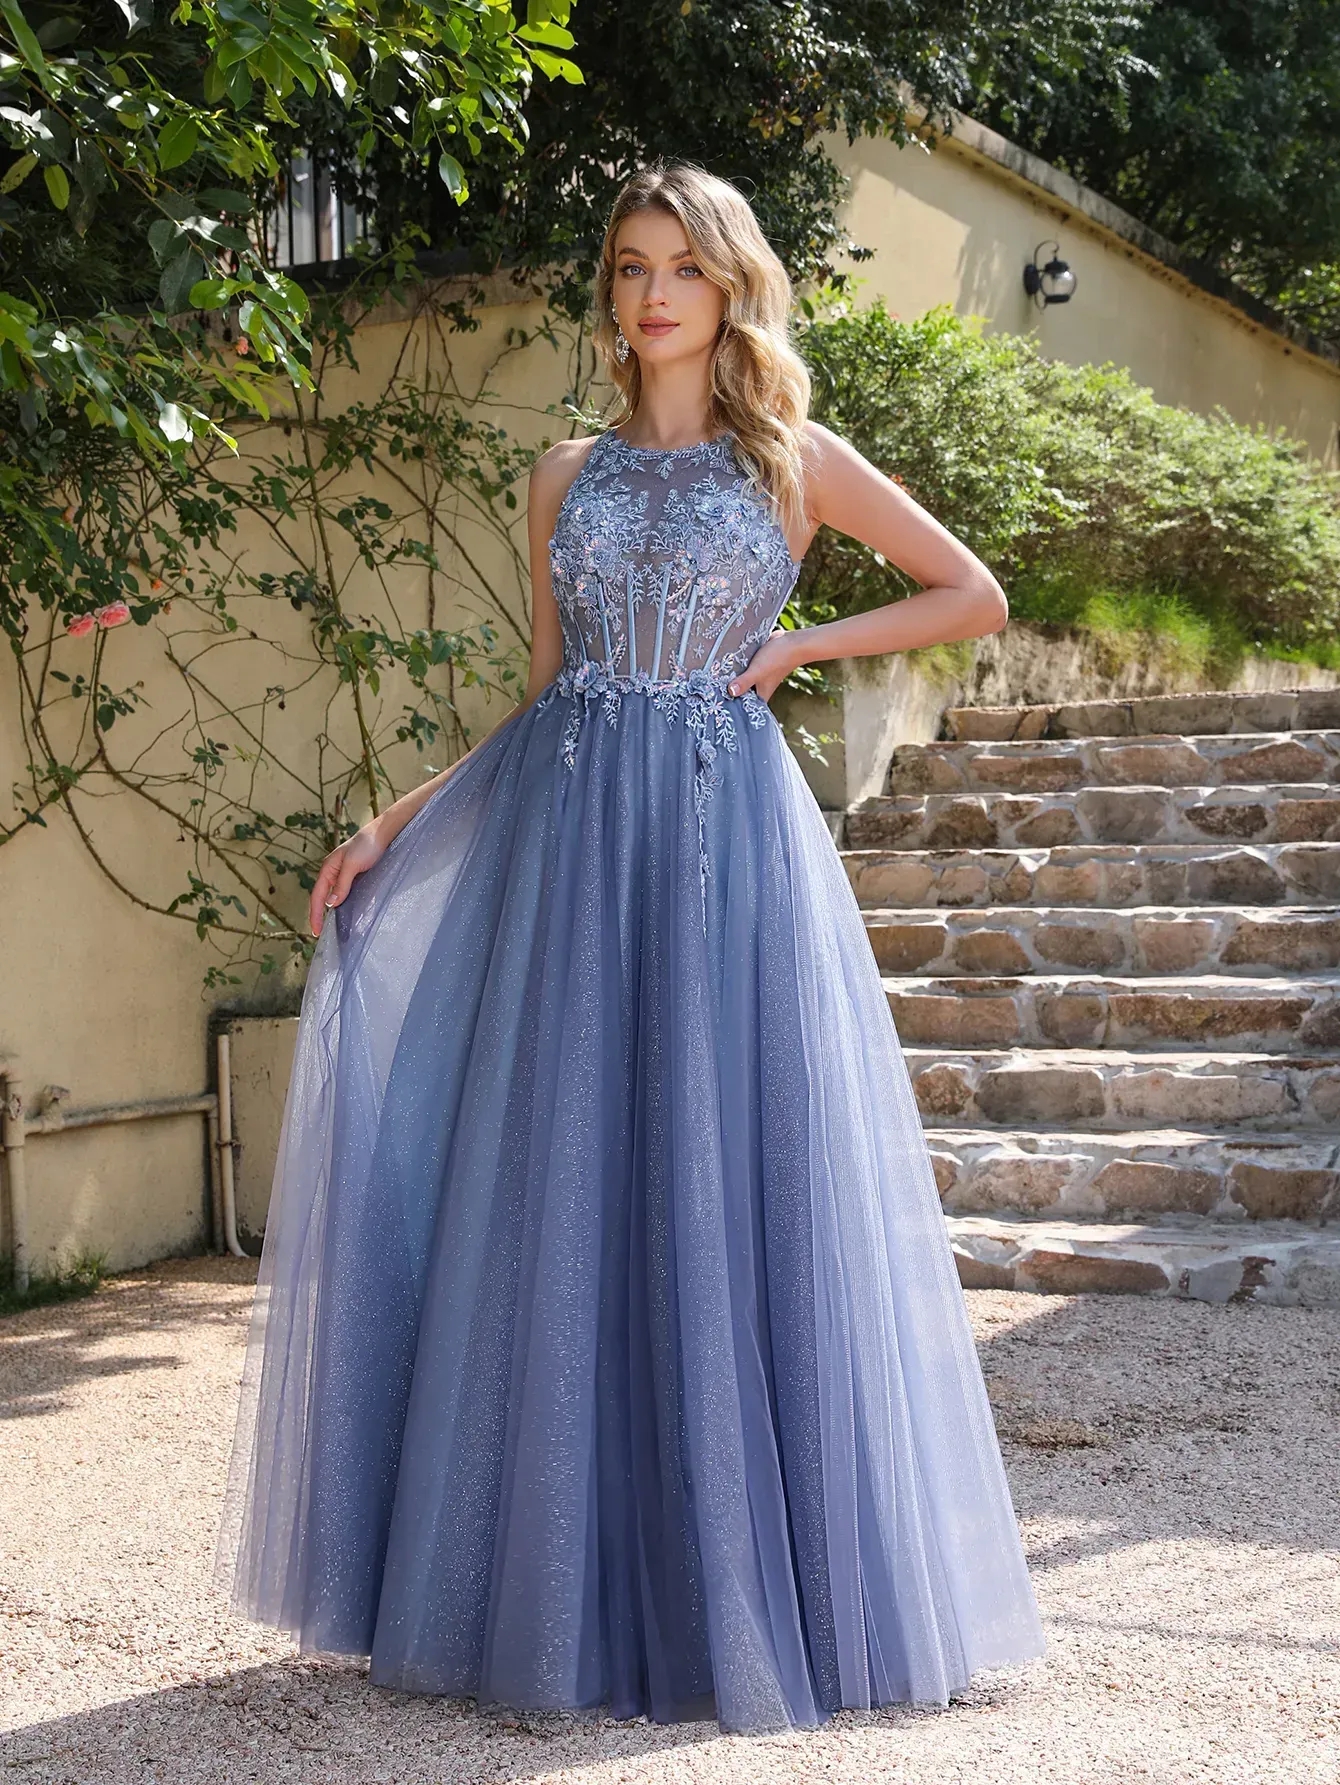 Ocean Blue Hollow Backless Prom Dresses A Line Appliques Sheer Jewel Neck Tulle Long Evening Gowns With Appliques CPS3039 YD